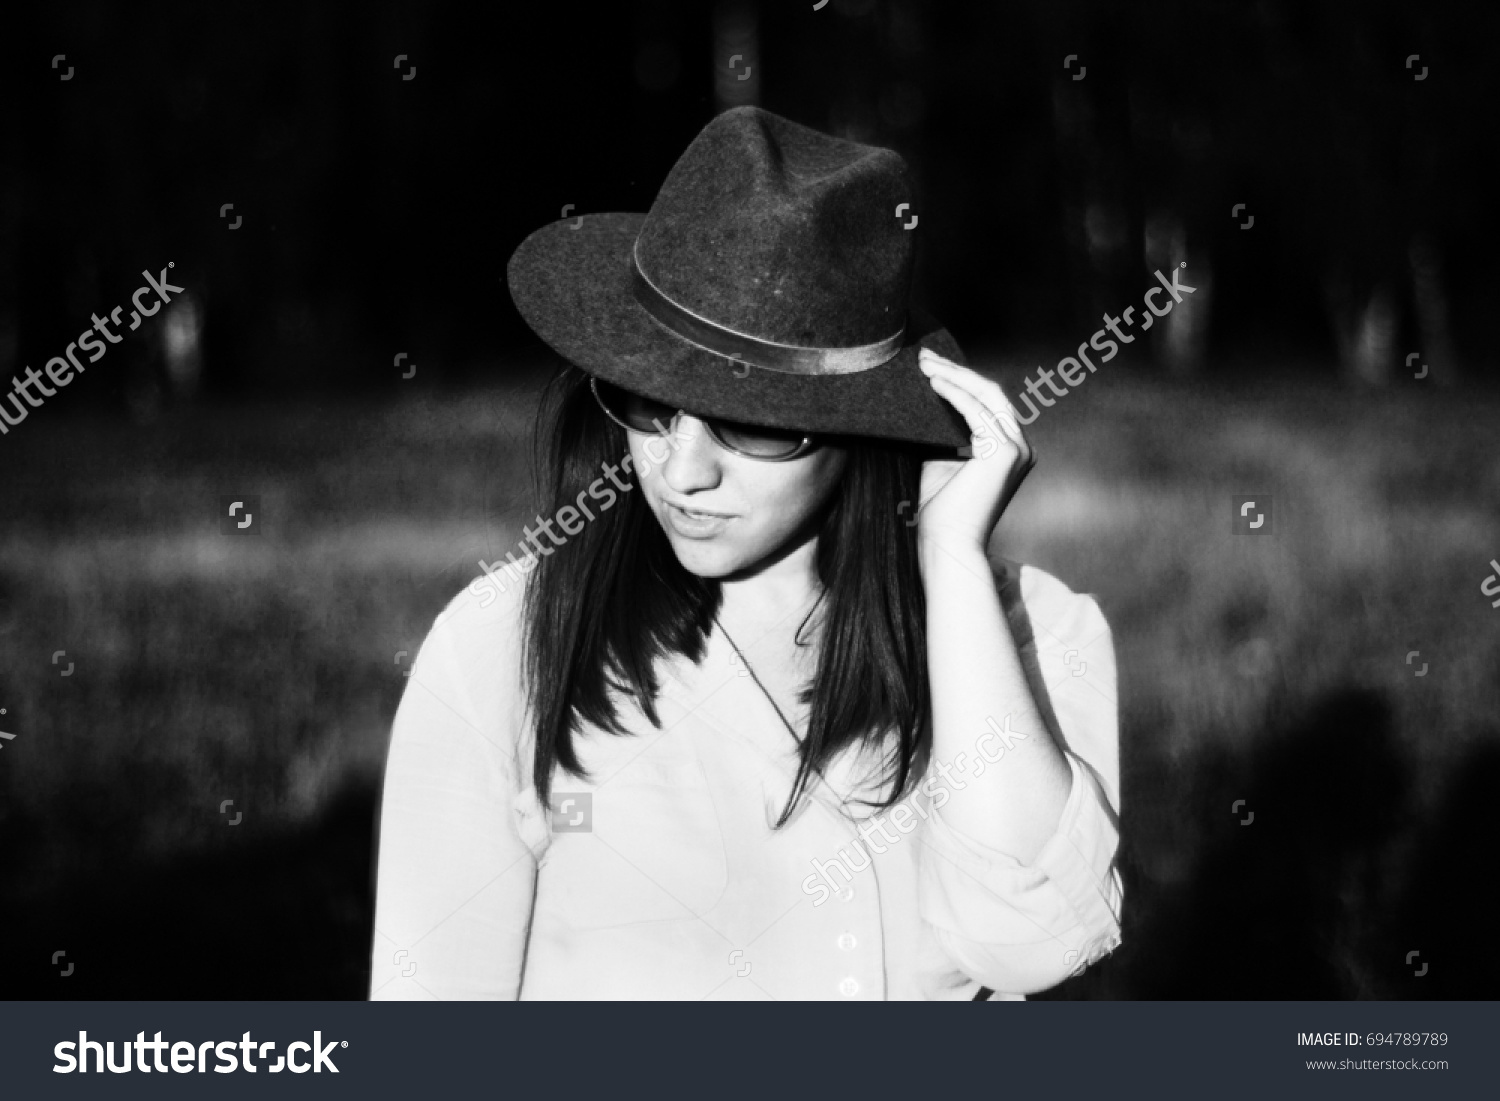 Black white photo of a girl in a hat #694789789